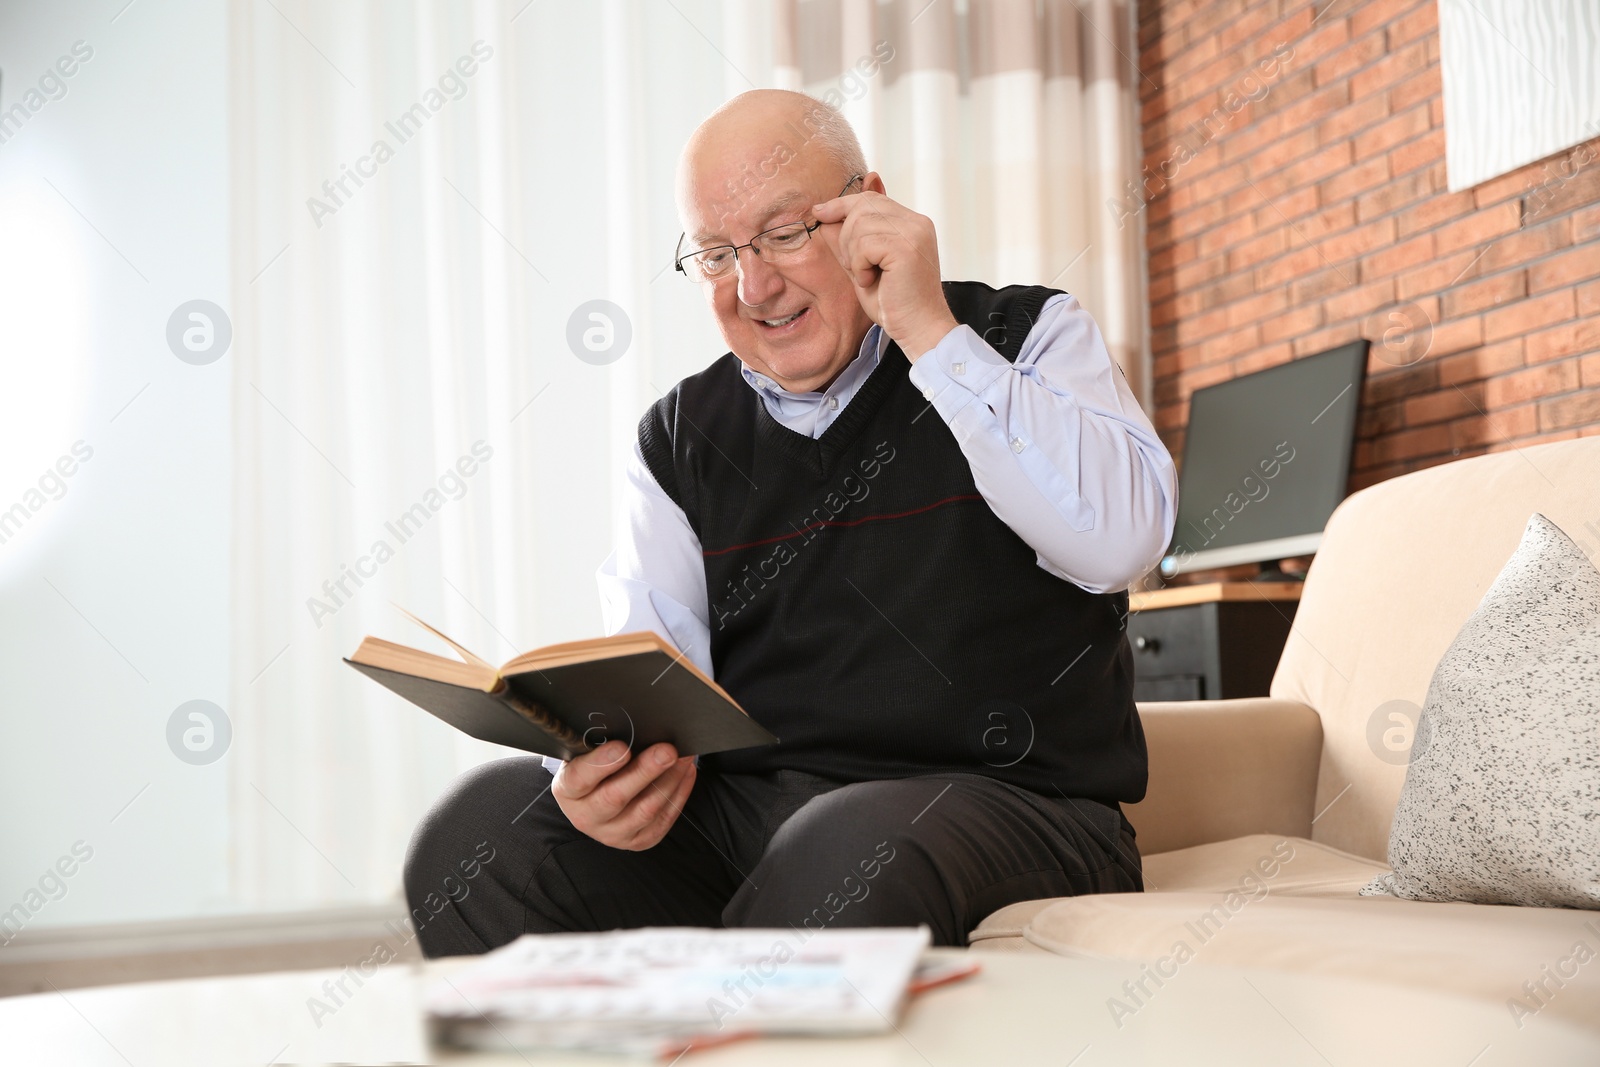 Photo of Elderly man reading book on sofa in living room